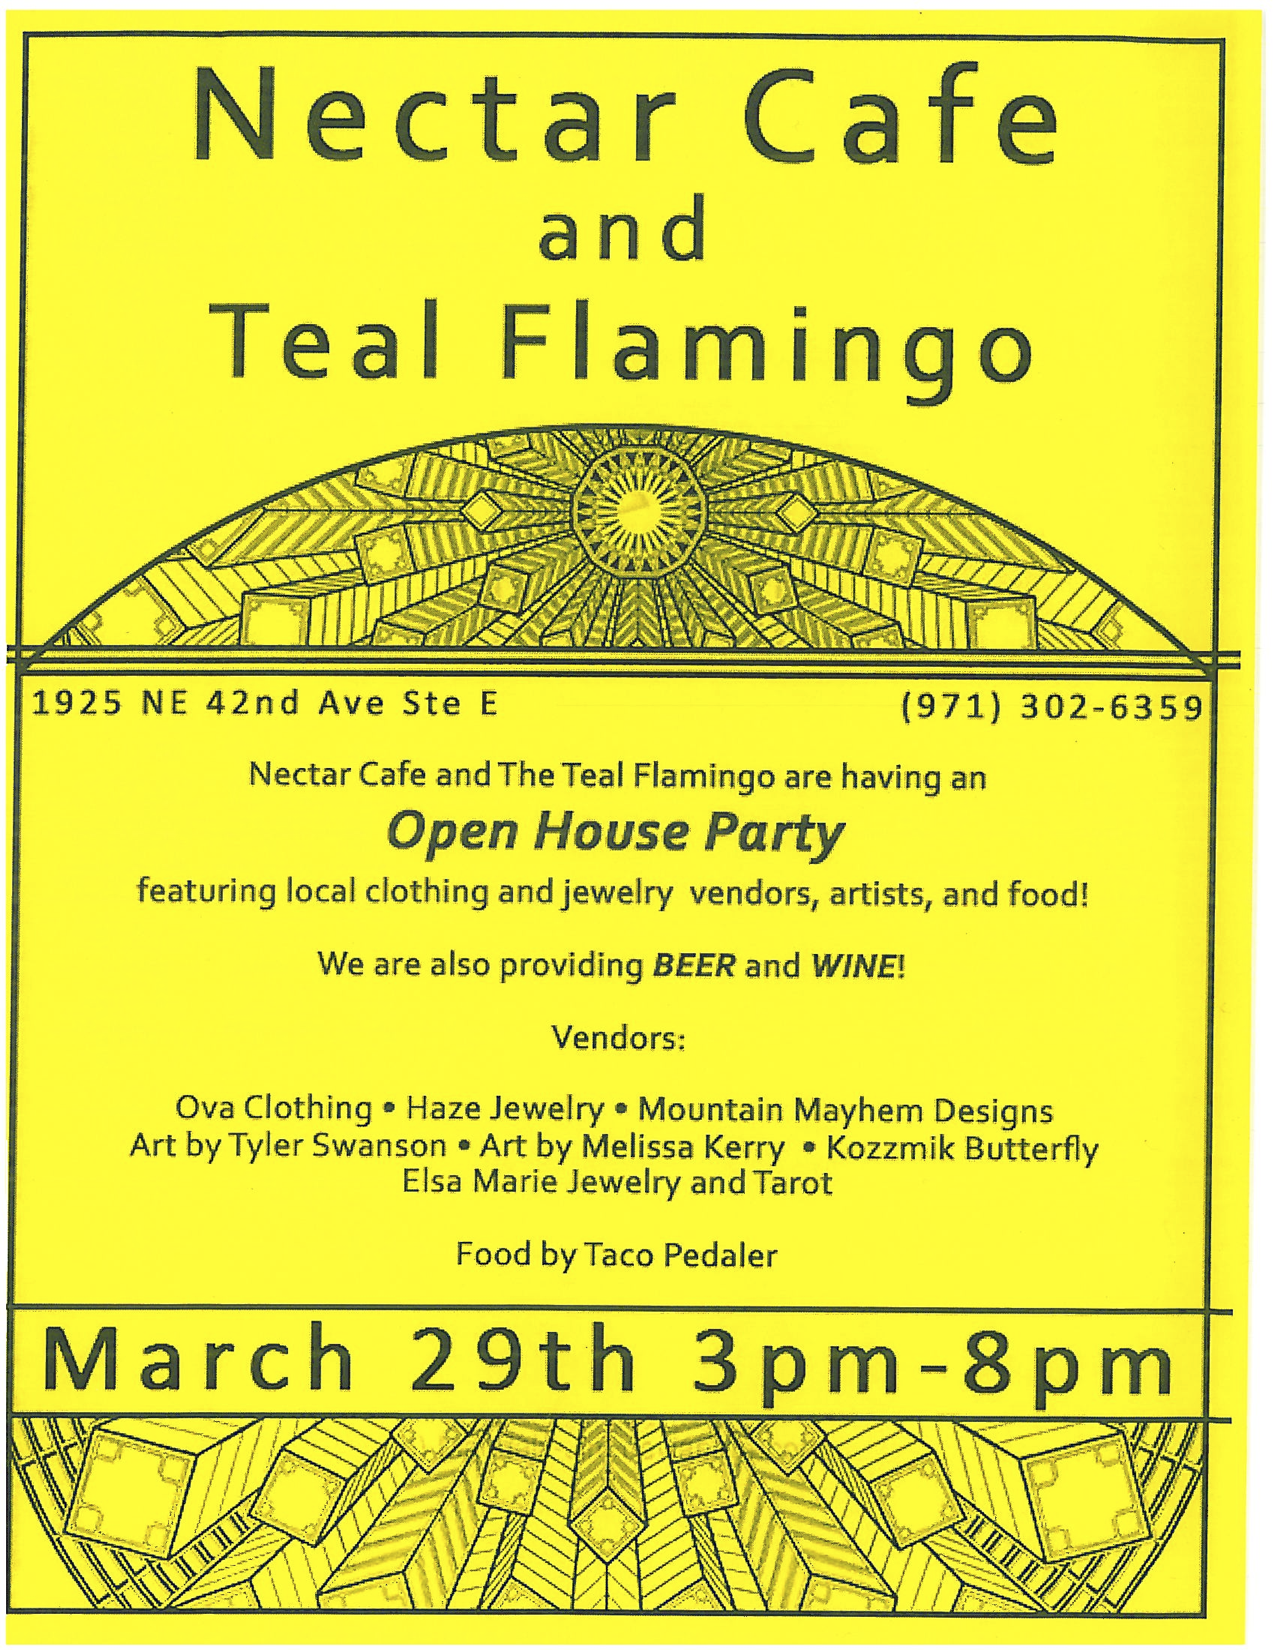 2014-March-29-Open-House-Nectar-Cafe-Teal-Flamingo